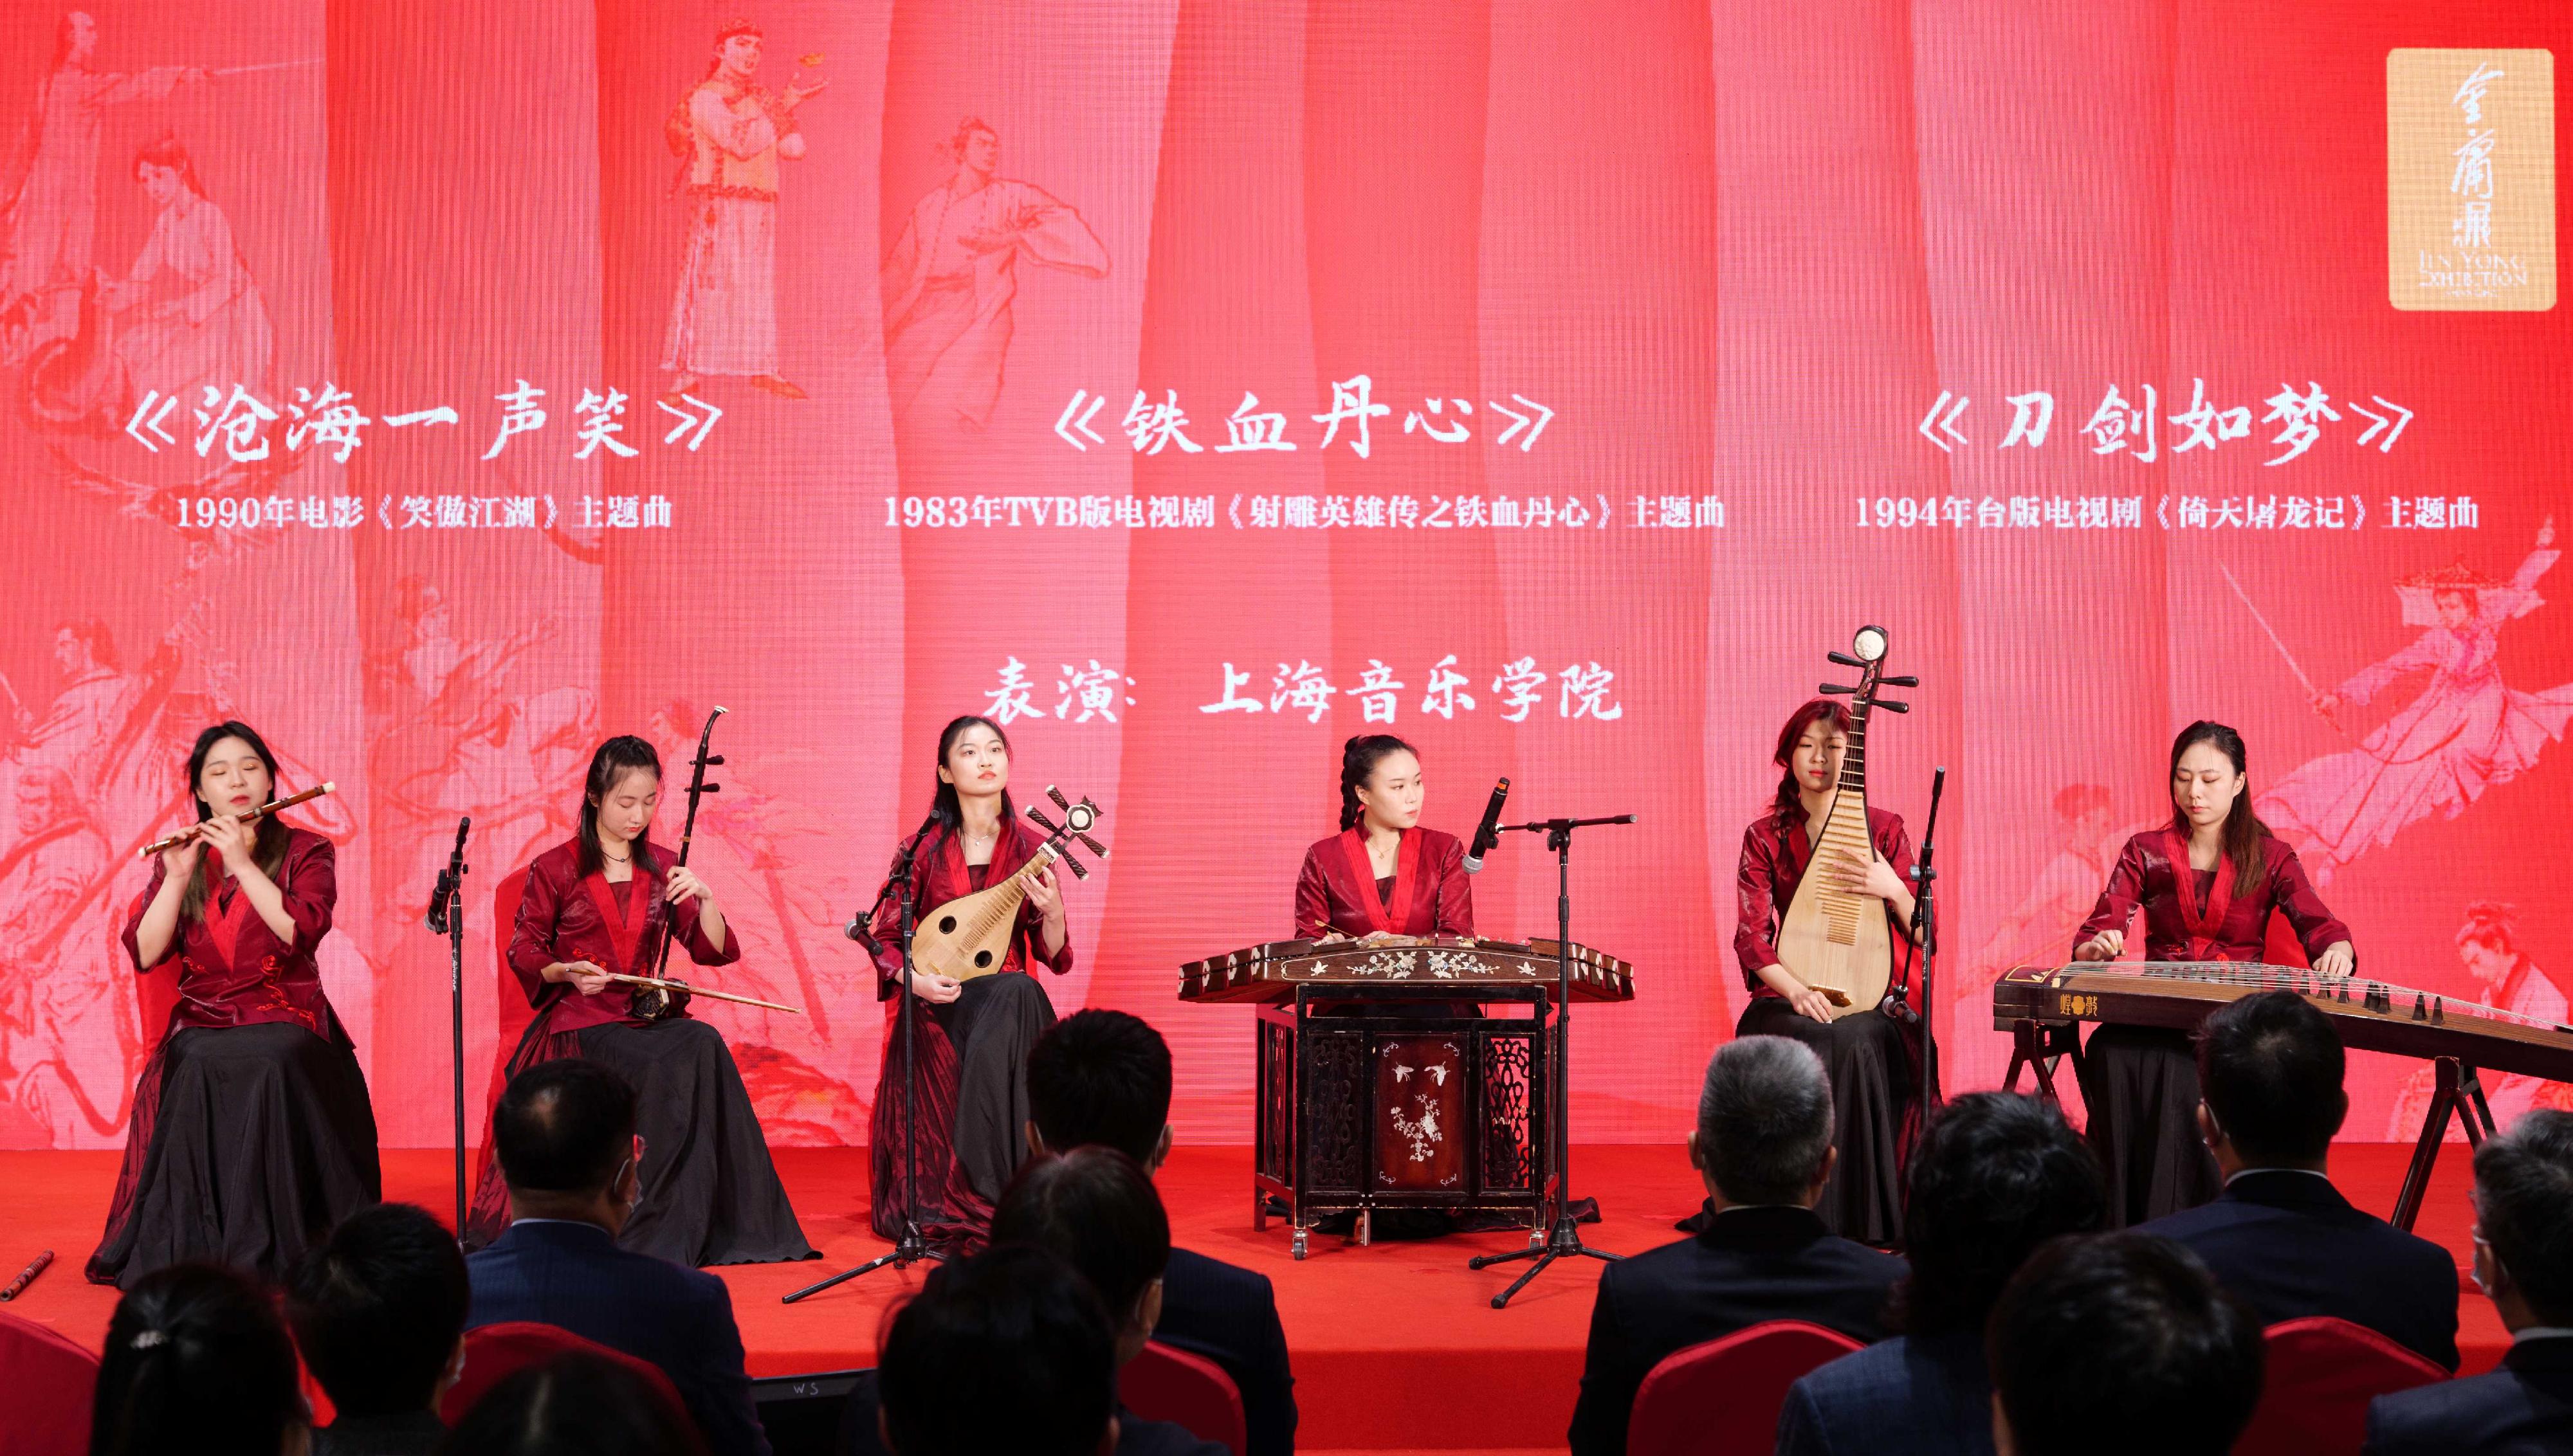 "Jin Yong Exhibition", organised by the Hong Kong Economic and Trade Office in Shanghai, was unveiled today (October 28) at Shanghai Library East in Shanghai. Photo shows students from the Shanghai Conservatory of Music performing classic songs from Jin Yong movies and TV dramas at the opening ceremony.